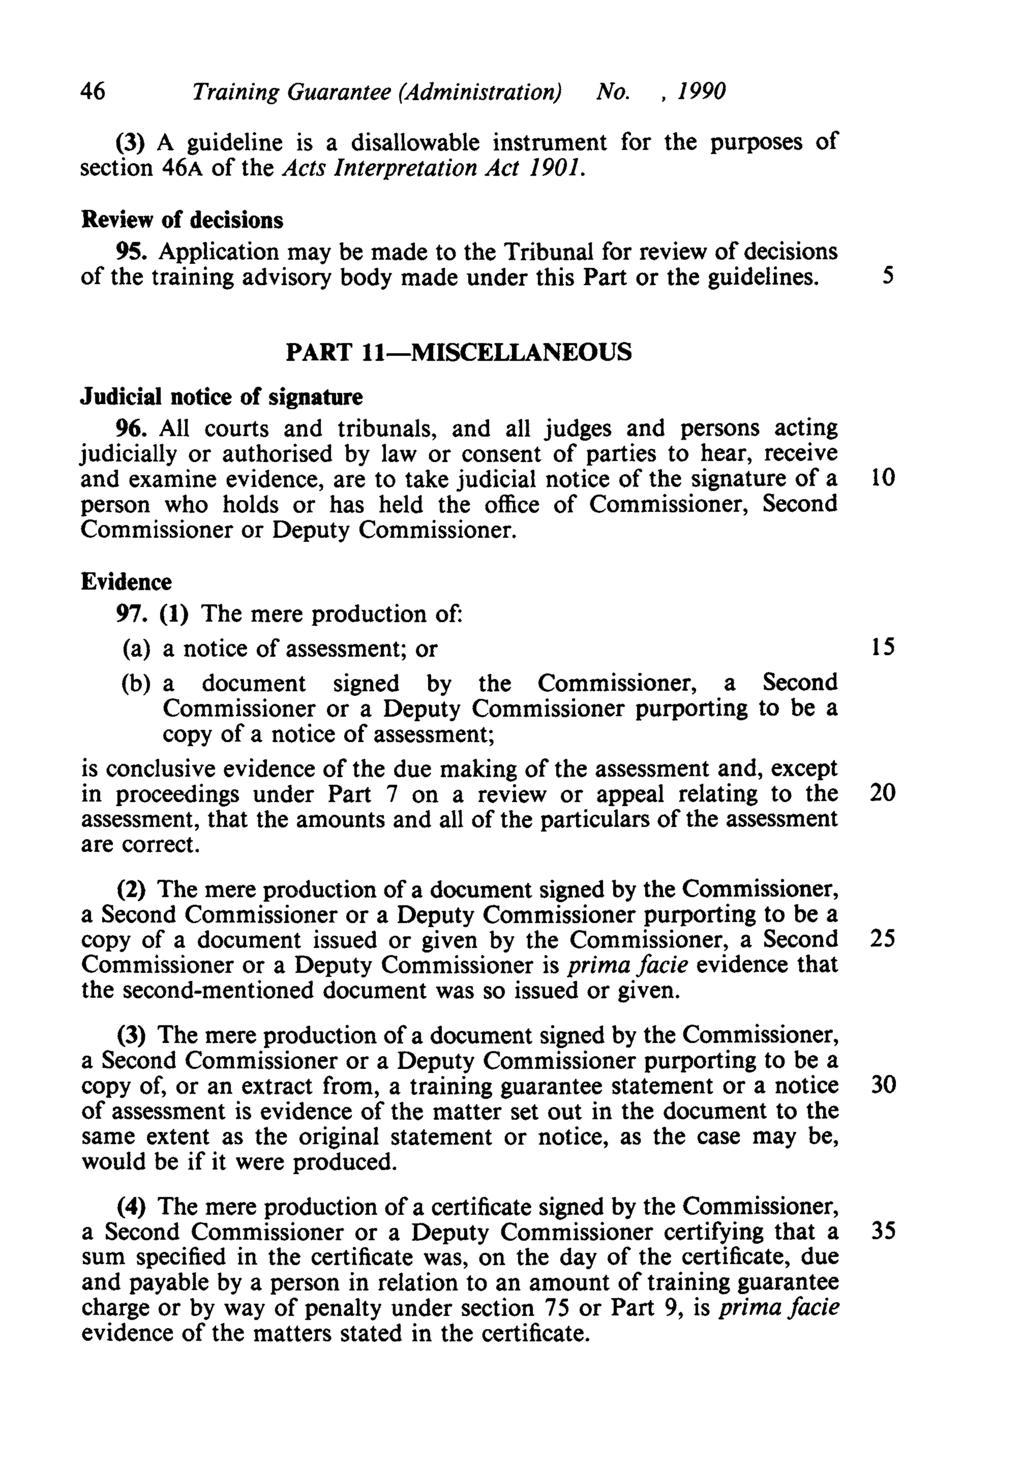 46 Training Guarantee (Administration) No.,1990 (3) A guideline is a disallowable instrument for the purposes of section 46A of the Acts Interpretation Act 1901. Review of decisions 95.